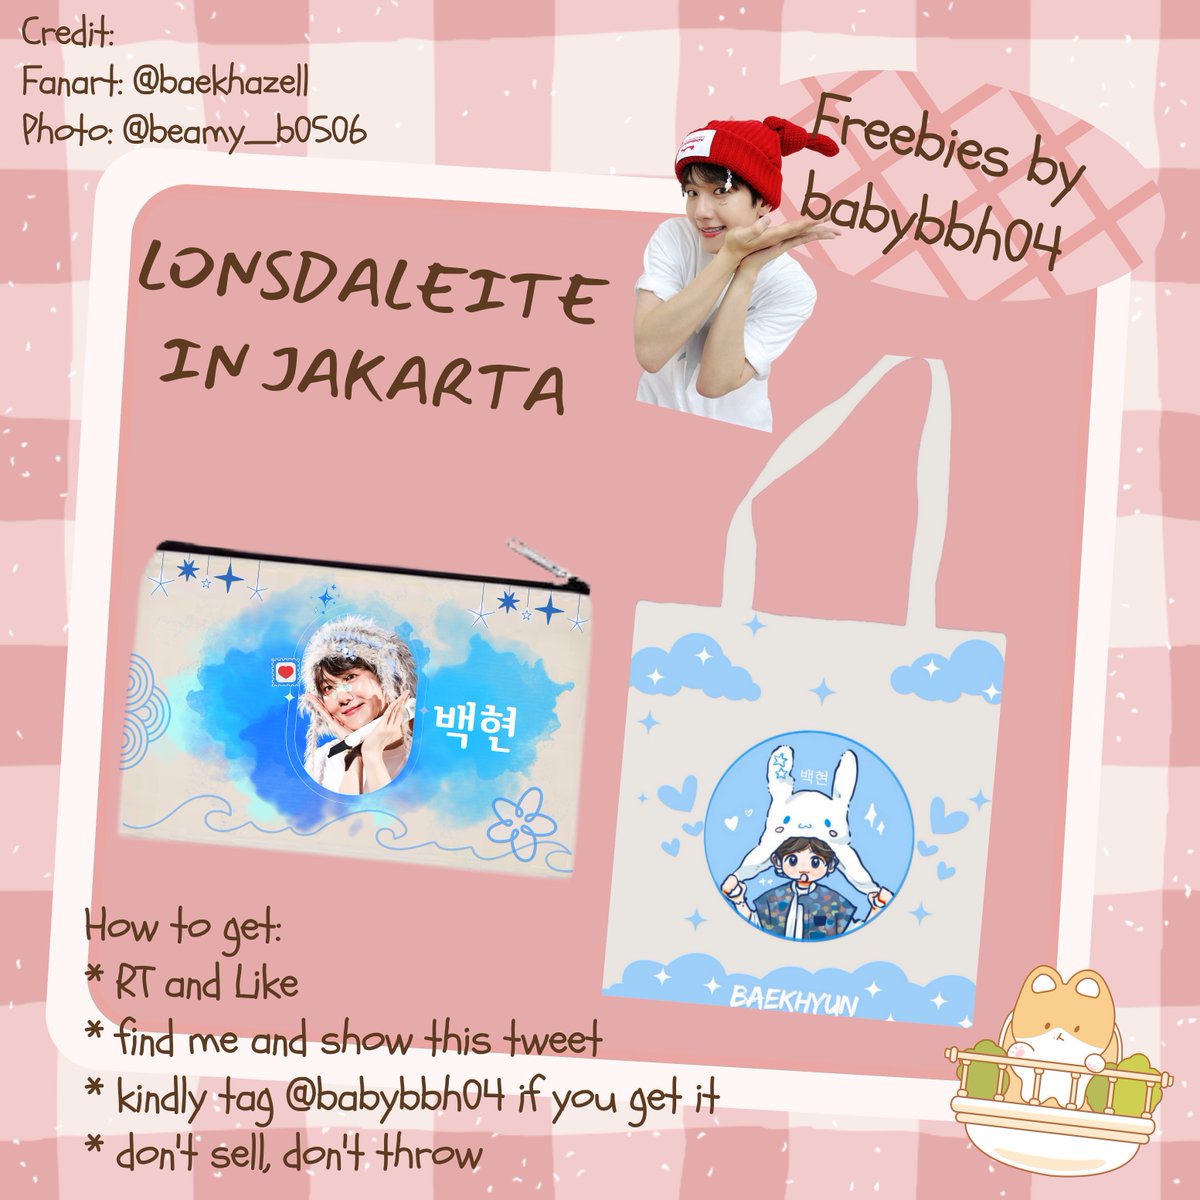 LONSDALEITE JAKARTA FREEBIES by @babybbh04

🗓️ 01 & 02 June 2024
loc & meeting time (tba)

🌷RT & like
🌷post and tag me if you get the freebies
🌷pouch or totebag -> limited quantity 

See you! 🫶

#Baekhyun #LonsdaleiteinJKT #백현